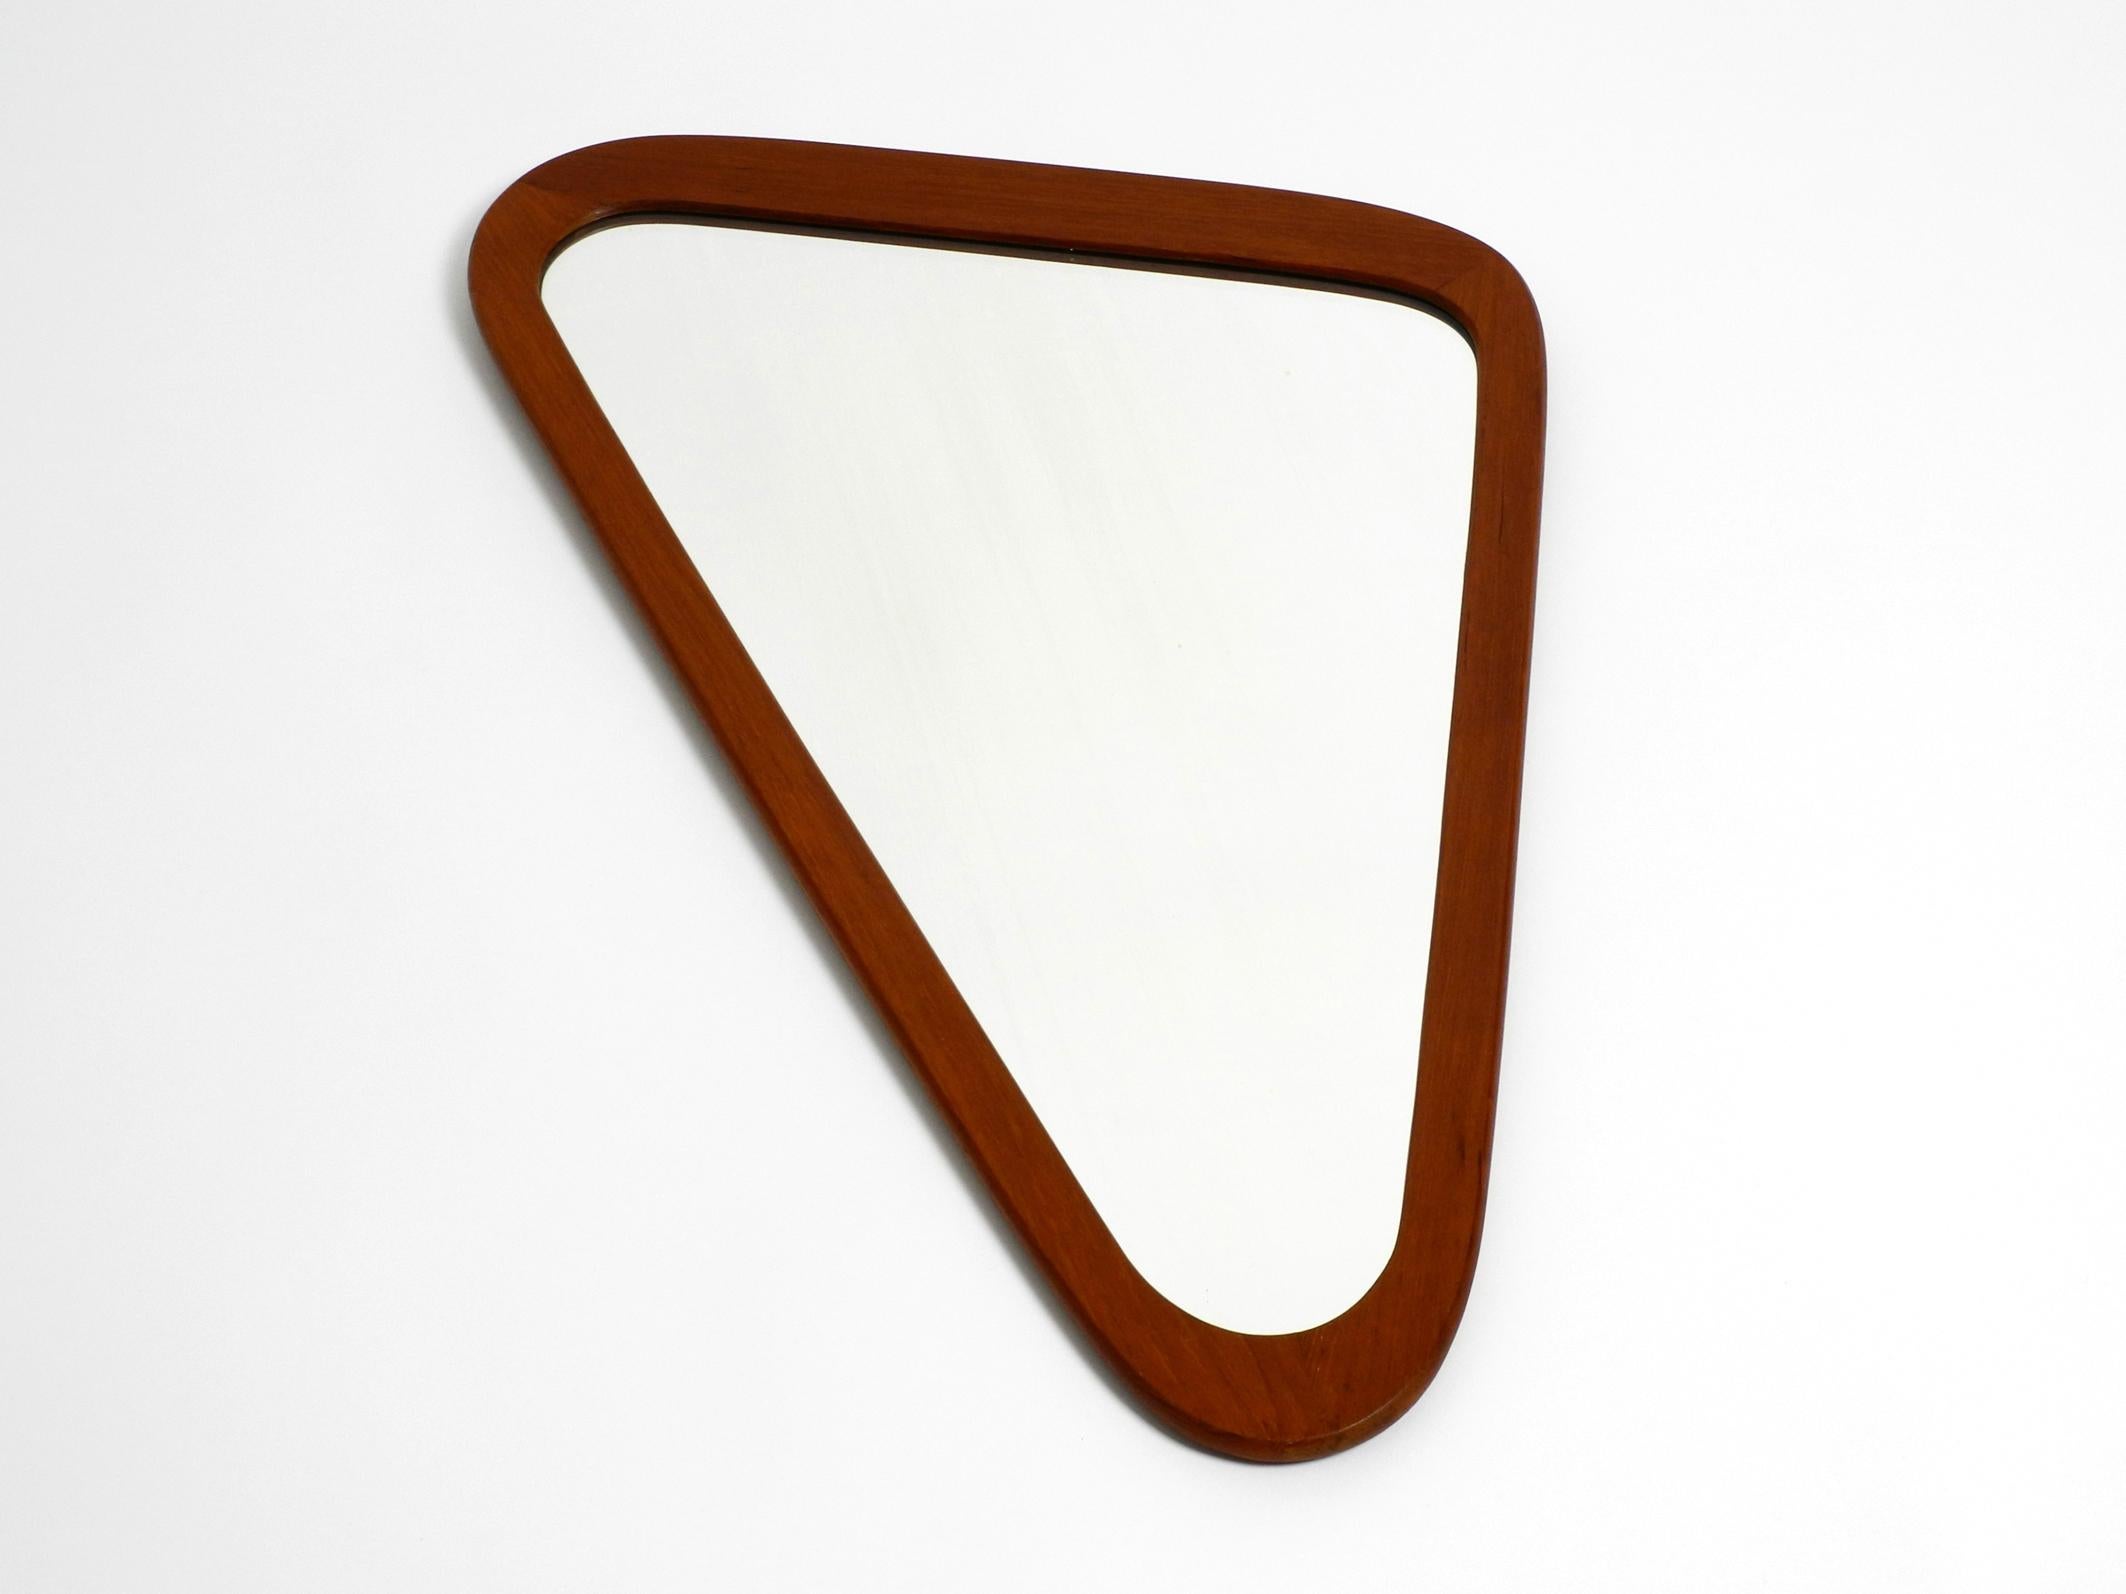 Stunning Scandinavian large midcentury teak wall mirror in an asymmetrical triangle shape.
Beautiful typical 1950s design.
High-quality workmanship in a minimalist Scandinavian design.
100% original condition. Very few signs of use.
With